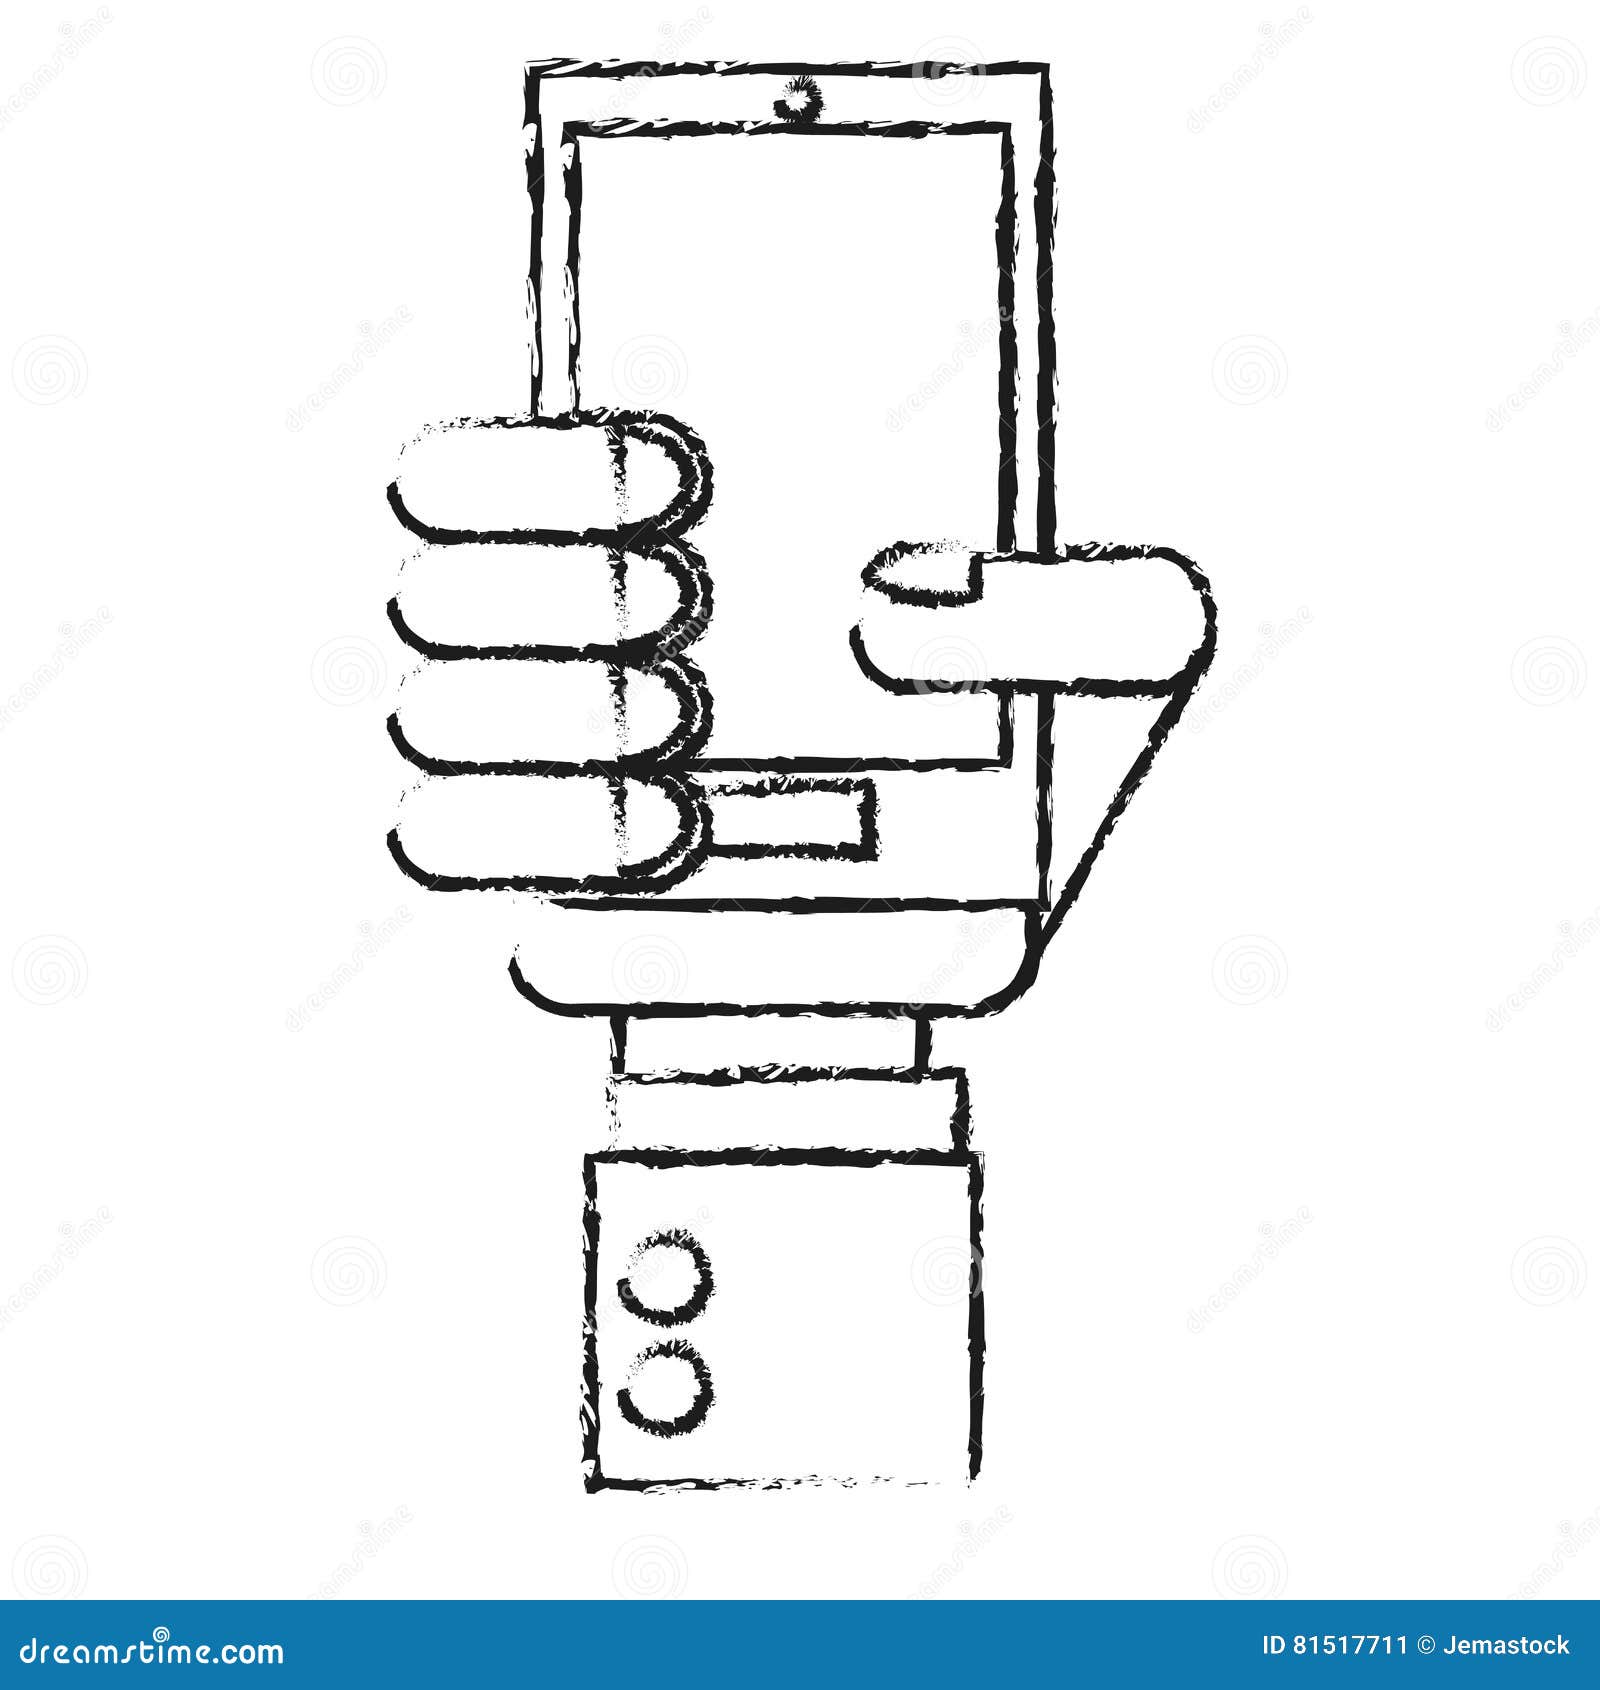 Isolated Smartphone Device Design Stock Vector - Illustration of design ...